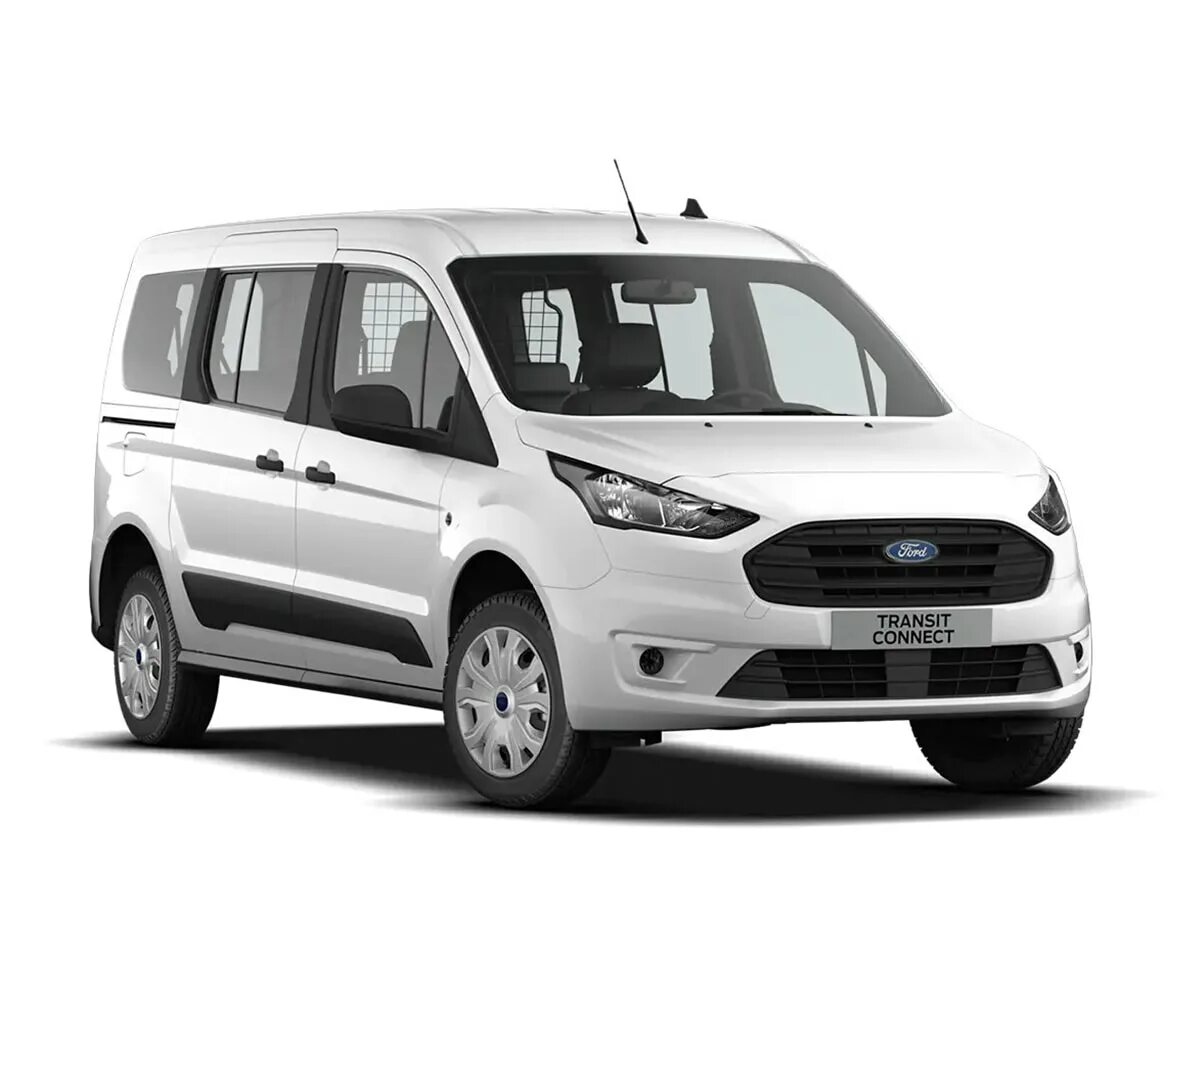 Форд Tourneo connect. Ford Tourneo connect 2018. Ford Tourneo connect 2017. Ford Tourneo connect 2013.